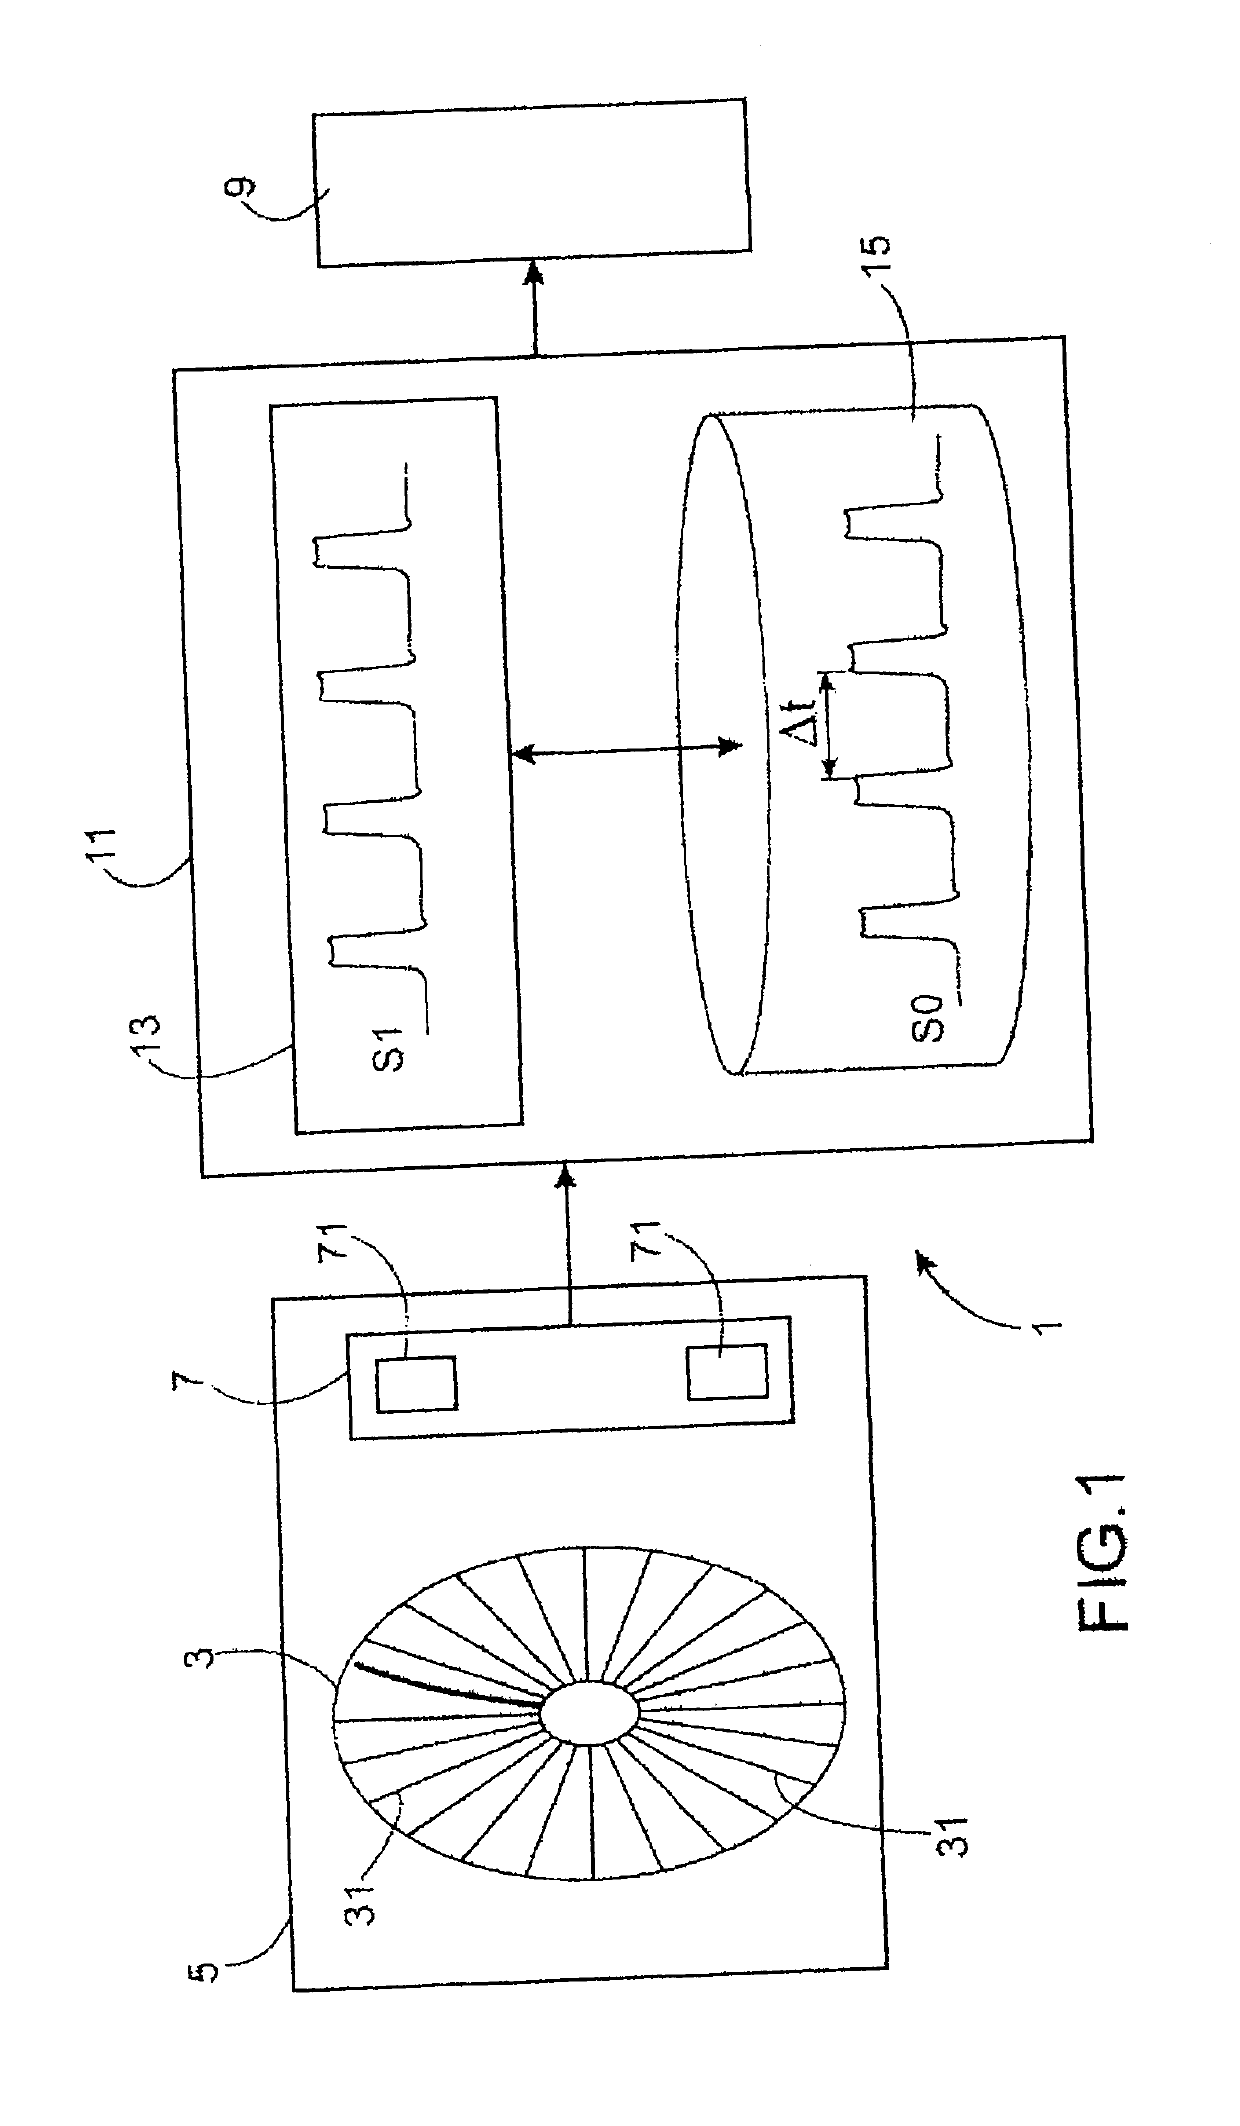 System for detecting an ephemeral event on a vane impeller of an aircraft engine